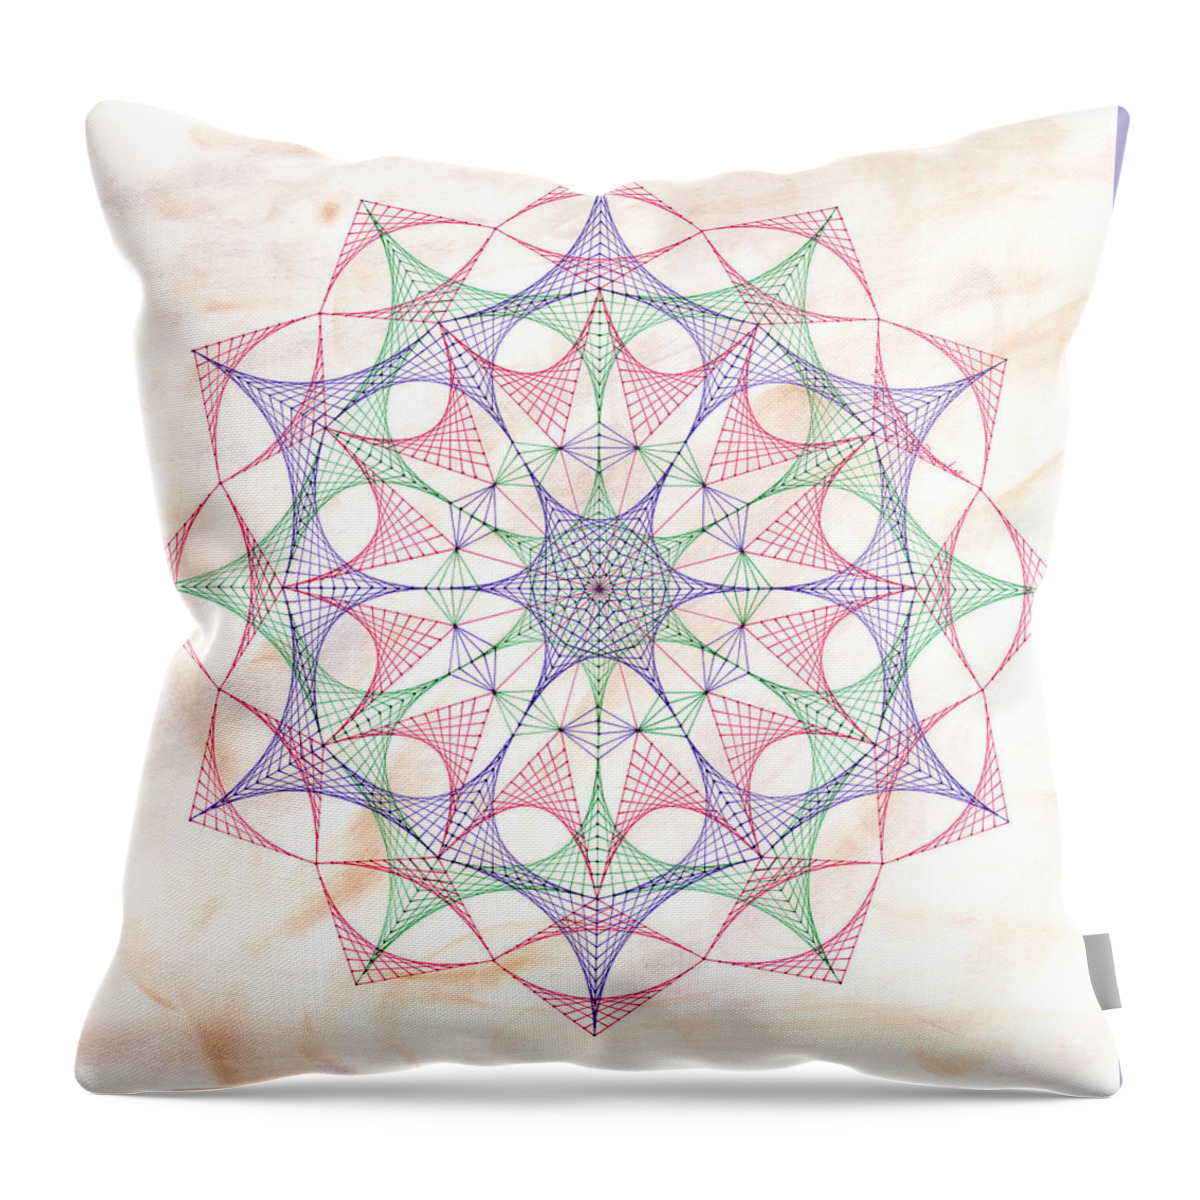 Geometry Throw Pillow featuring the drawing Strike 4 by Bev Donohoe